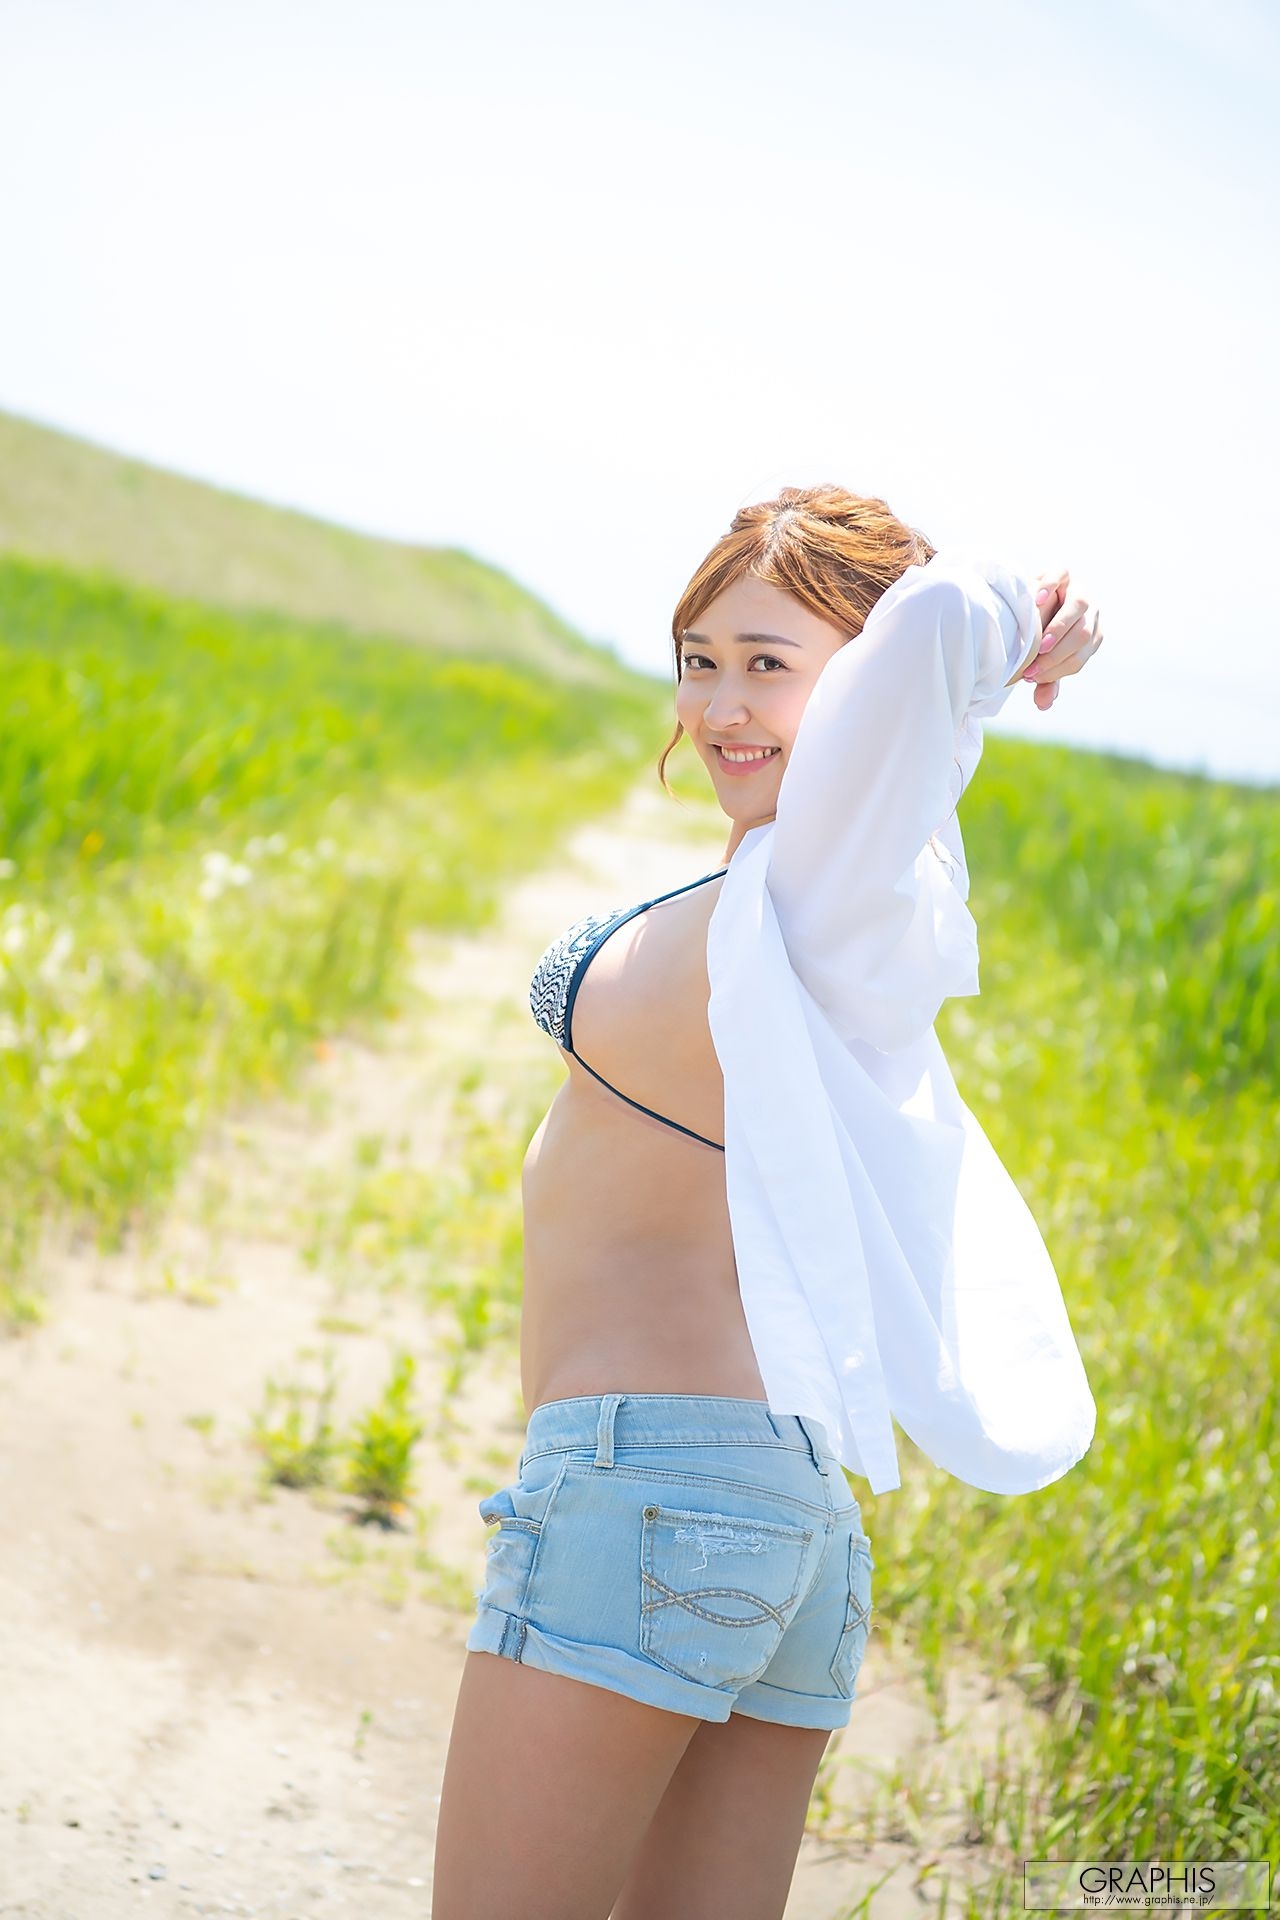 [Graphis] First Gravure 初脱ぎ娘 No.170 An Mitsumi 蜜美杏 